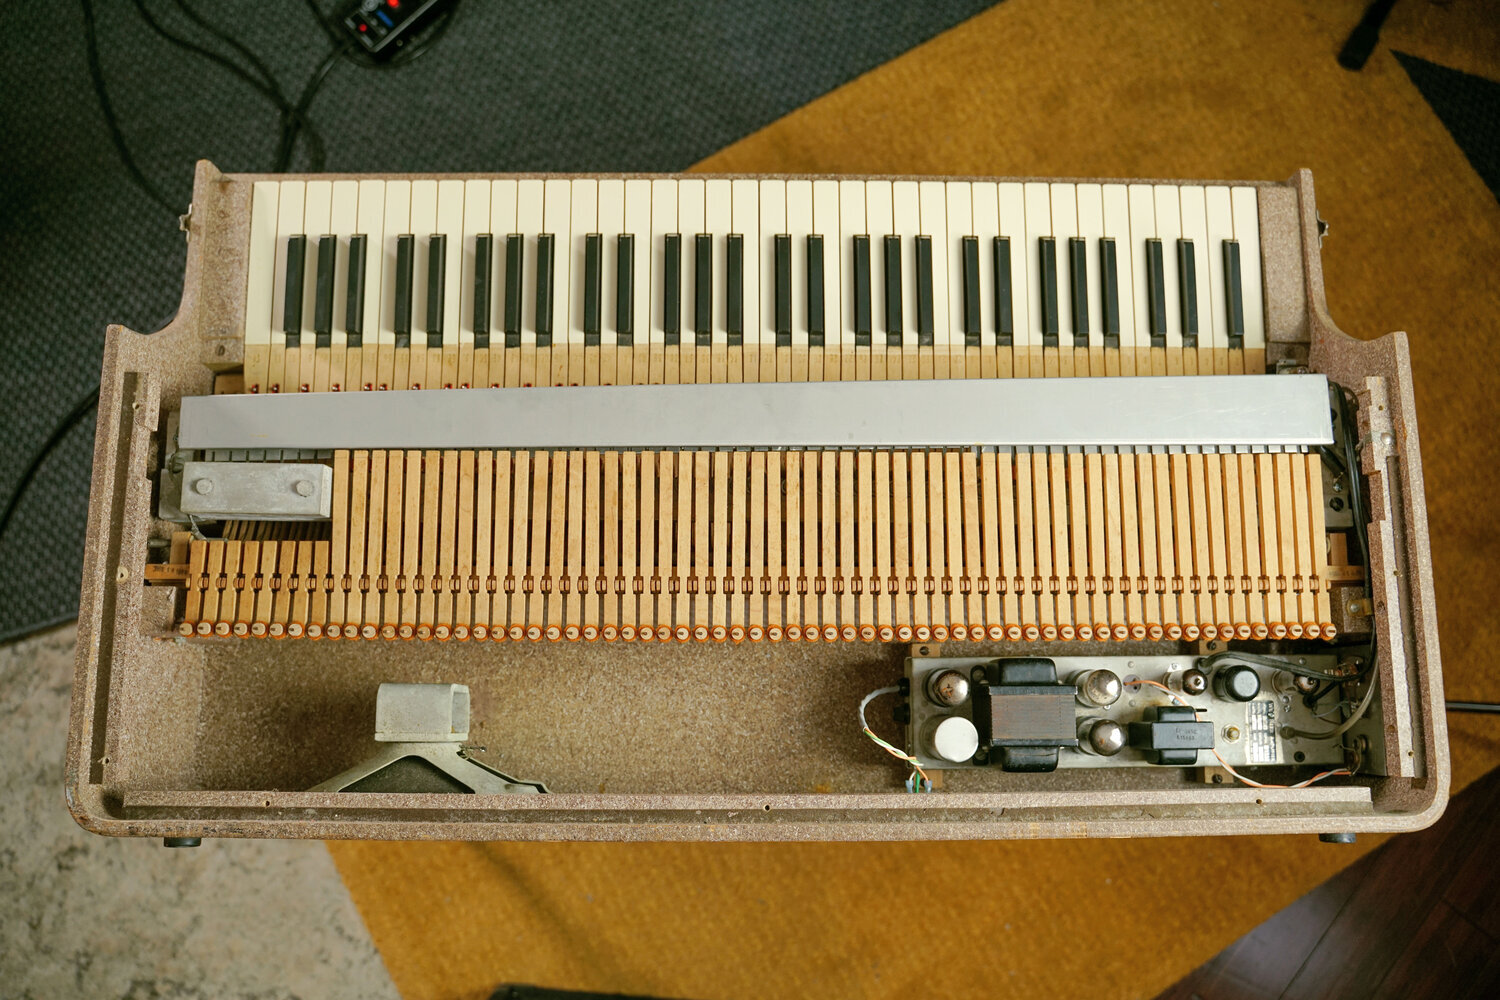 What speaker impedances can I safely connect to my tube Wurlitzer electronic piano?